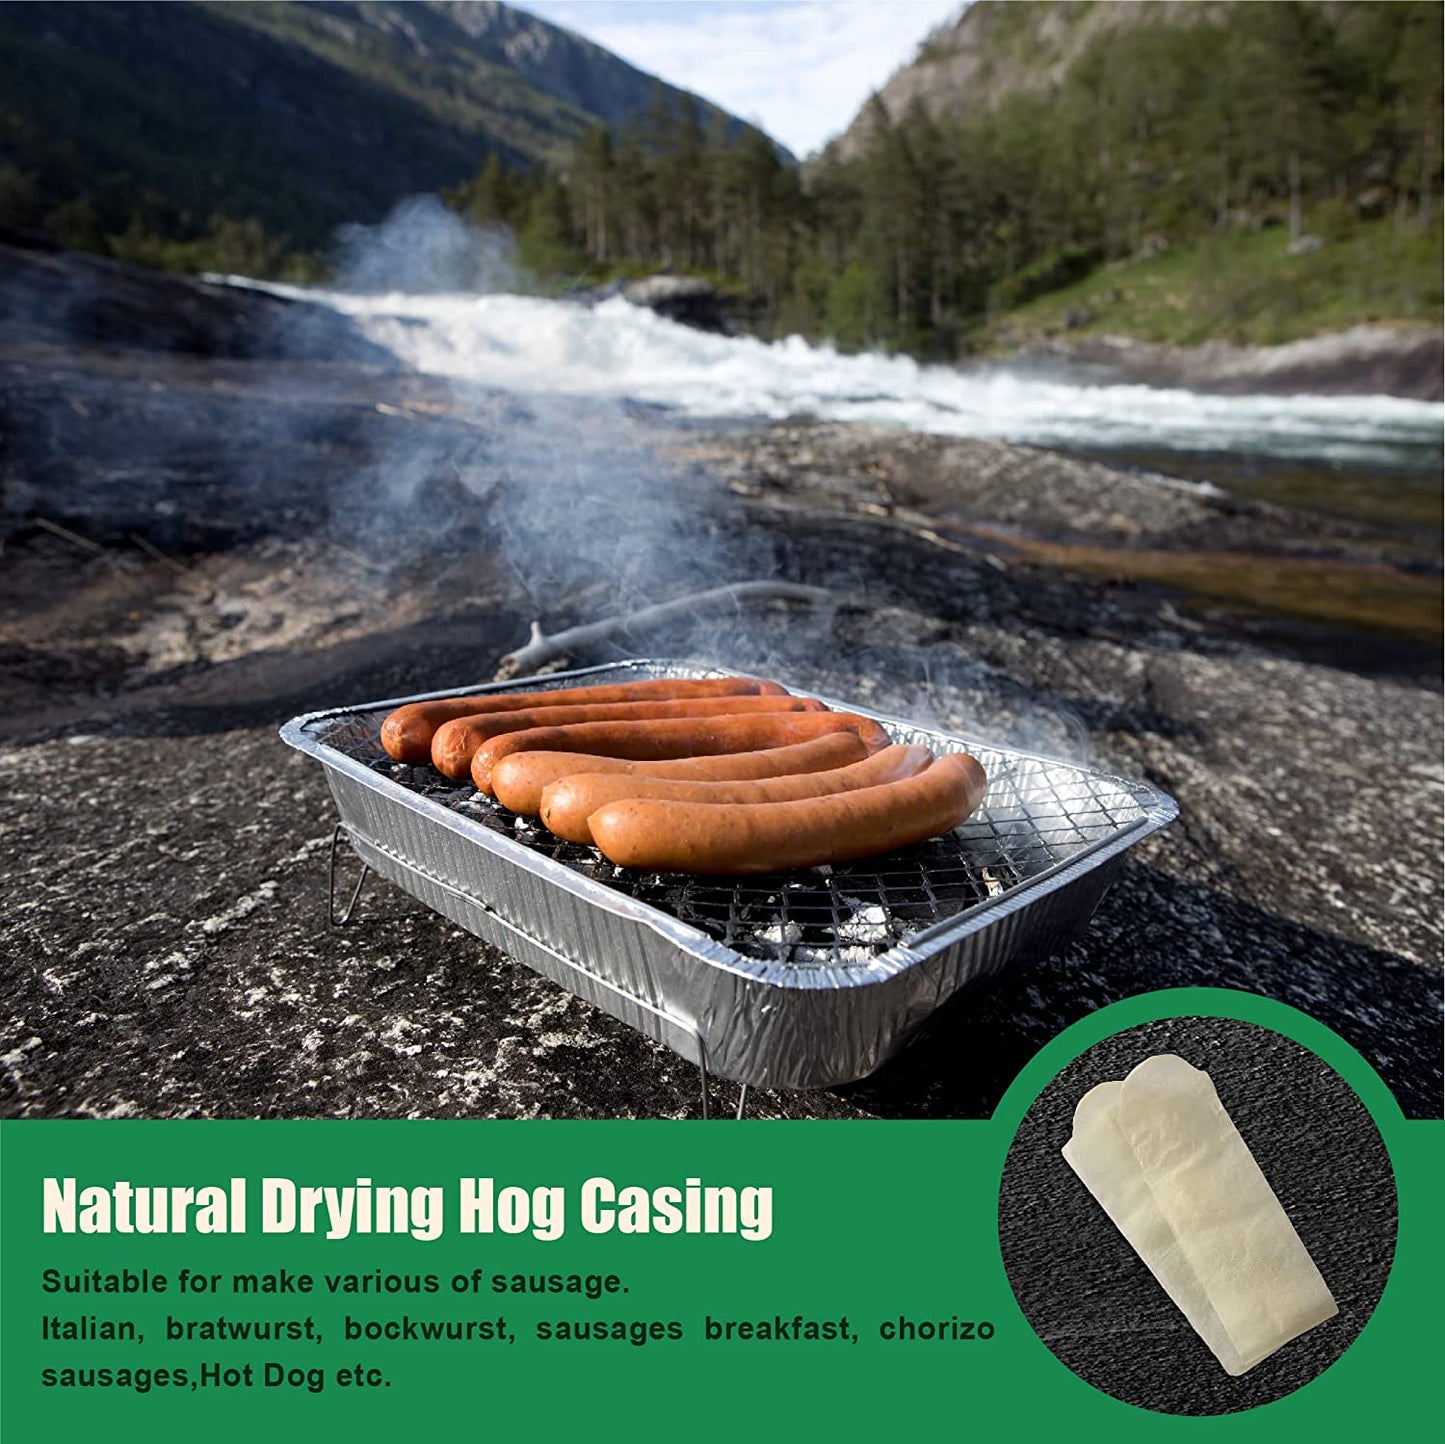 Edible Drying Hog Sausage Casing, Sausage Casings for Flavorous Homemade Sausages Ham,Breakfast Sausage,Italian Sausage,Knoblewurst,Pepperoni,Bologna Sausage and Most Delicious Sausage 10pcs (each 45cm/ 1 25/32'')